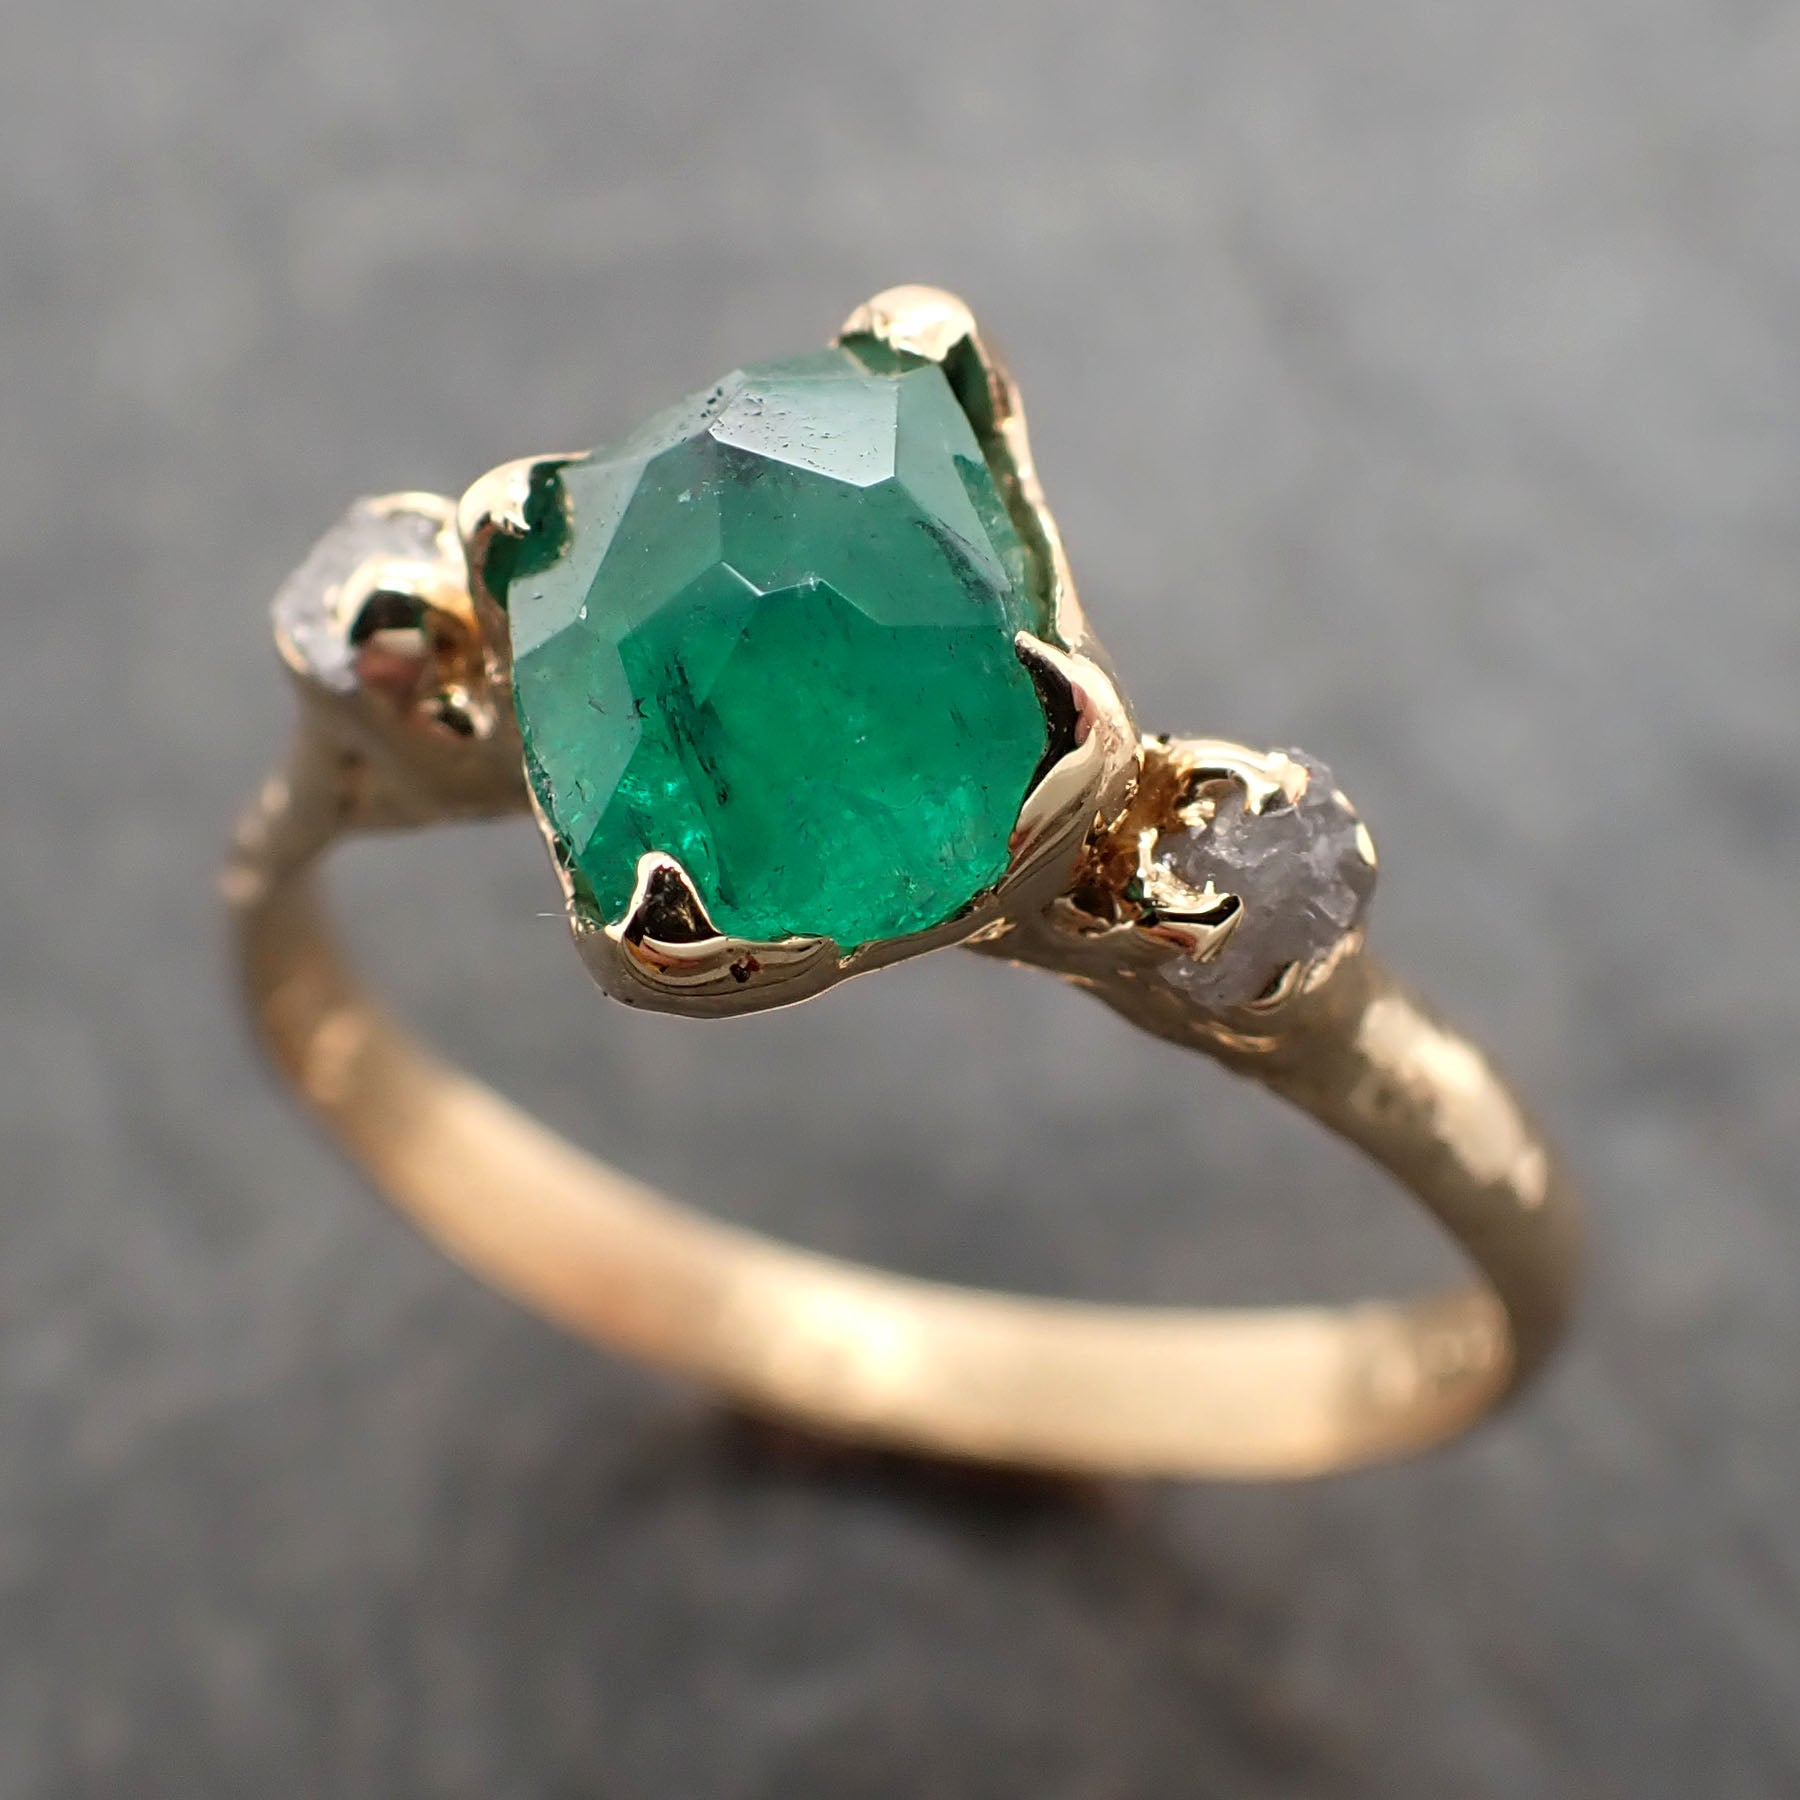 Partially faceted Three raw Stone Diamond Emerald Engagement Ring 18k Gold Multi stone Wedding Ring Uncut Birthstone Stacking Ring Rough Diamond Ring byAngeline 2383